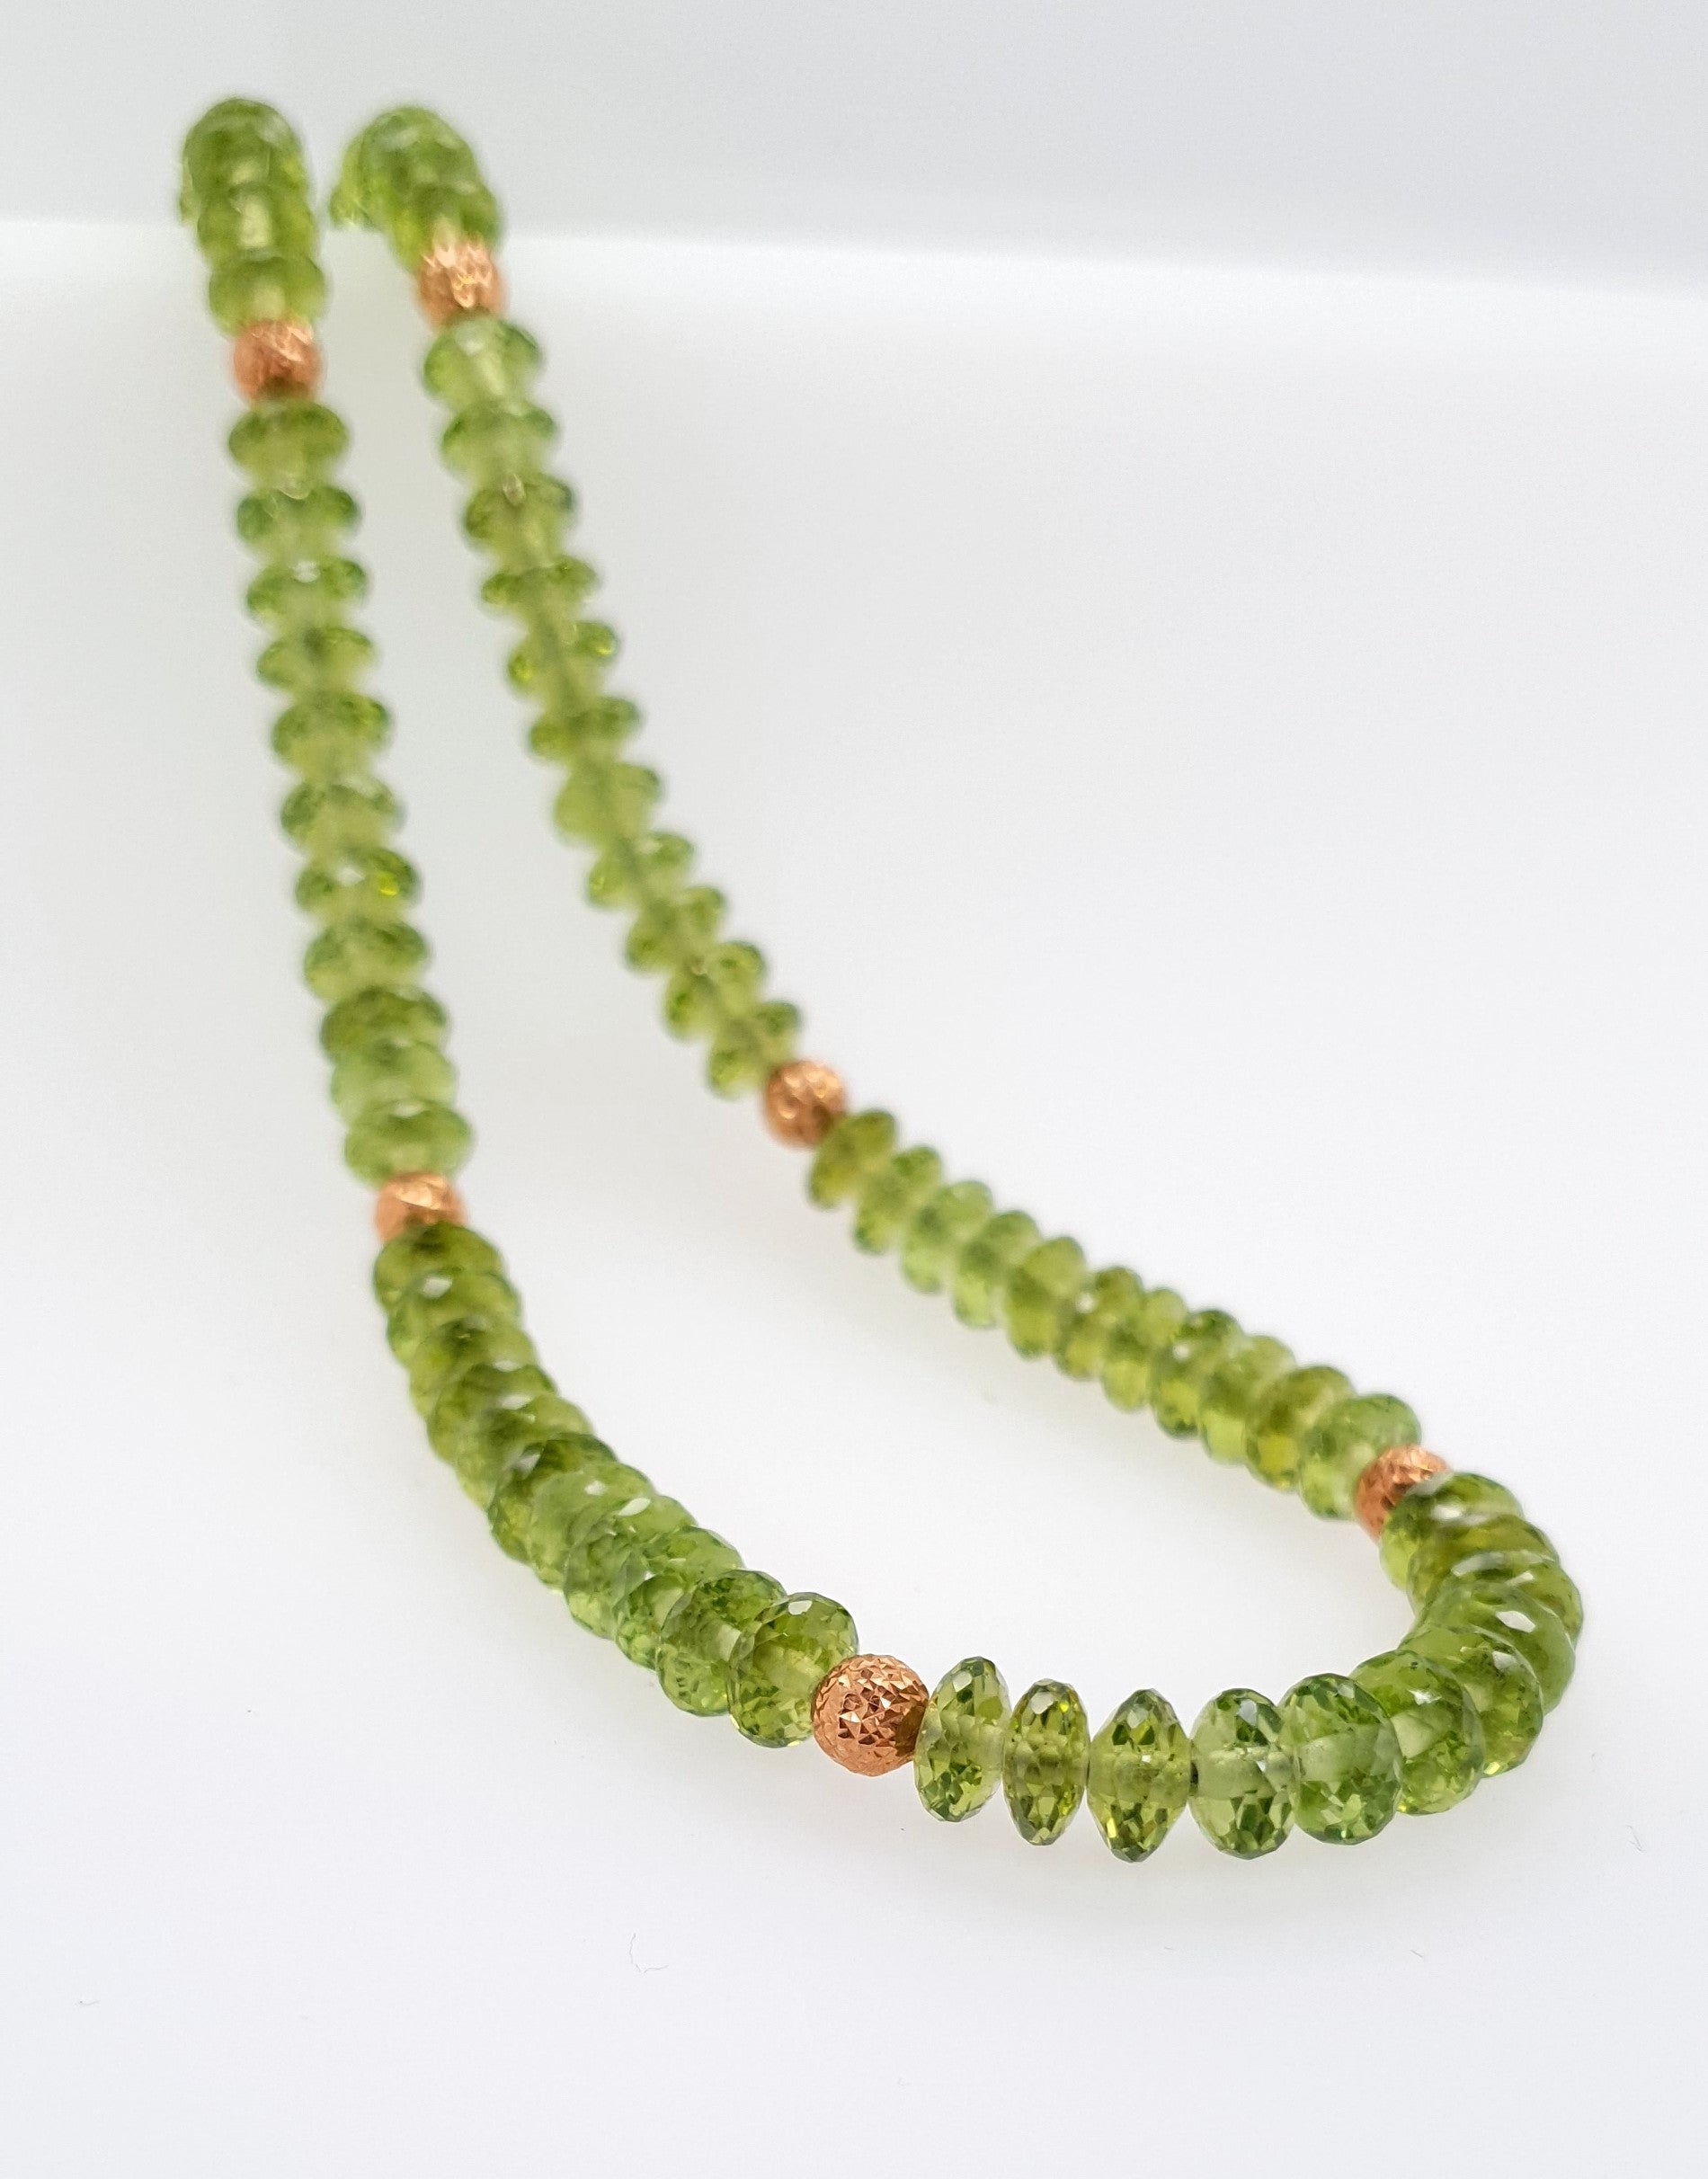 Faceted Green Peridot Rondel Beaded Necklace with 18 Carat Rose Gold